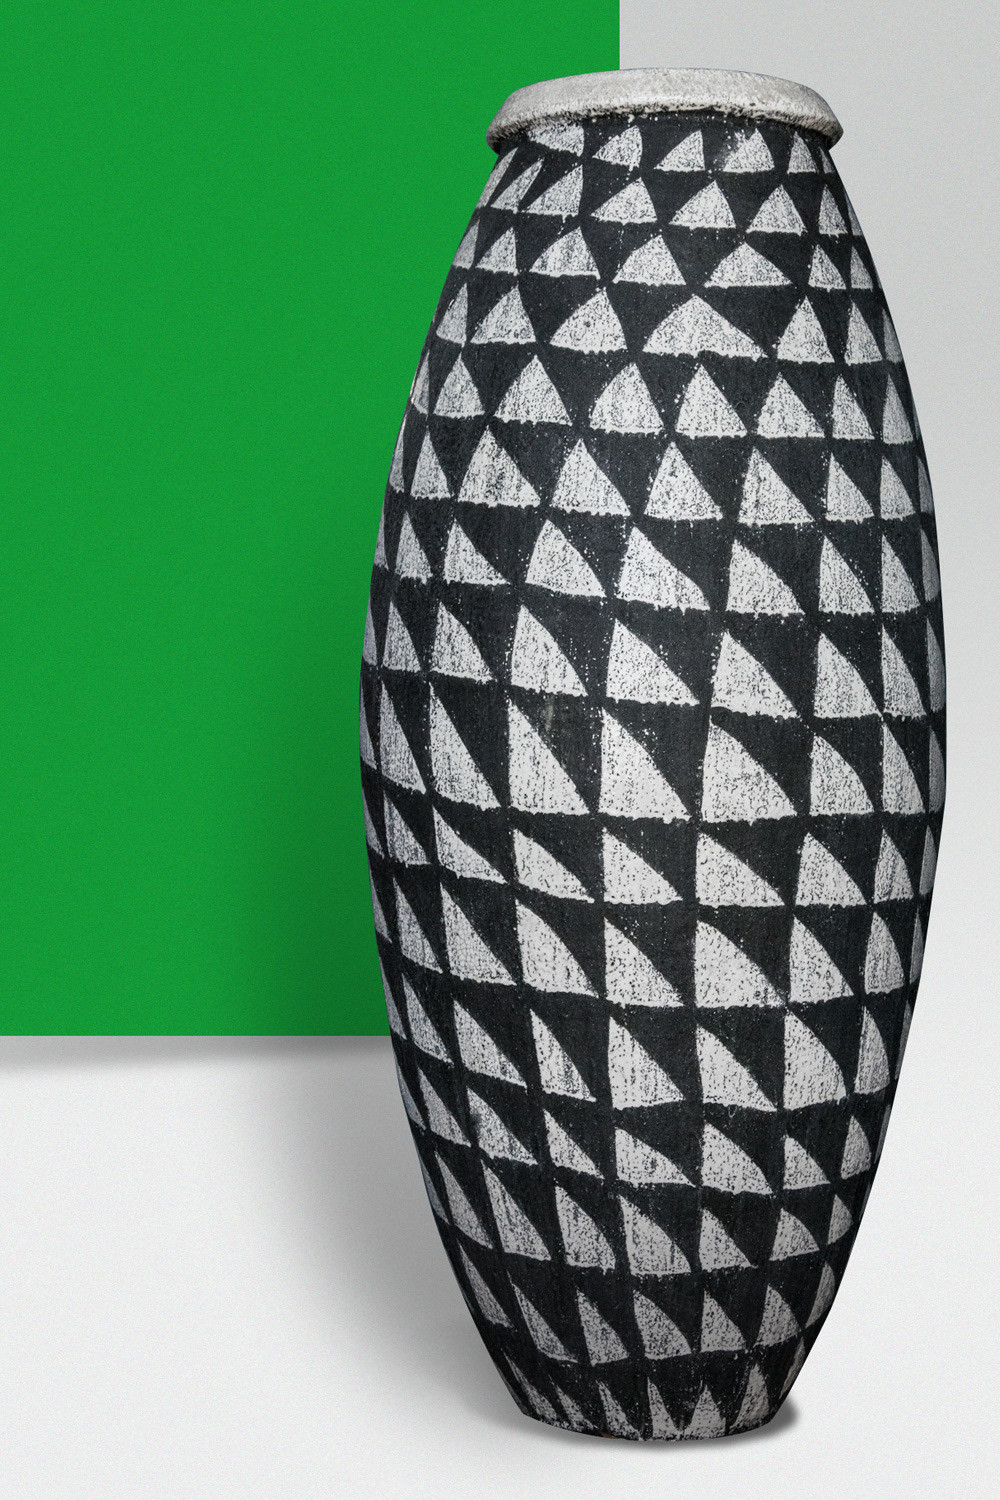 30 Lovely Black and White Ceramic Vase 2024 free download black and white ceramic vase of muse modern burkina floor vase throughout burkina floor vase a handmade and gloriously imperfect graphic pattern draws the eye in and the heart out 55h x 24 5